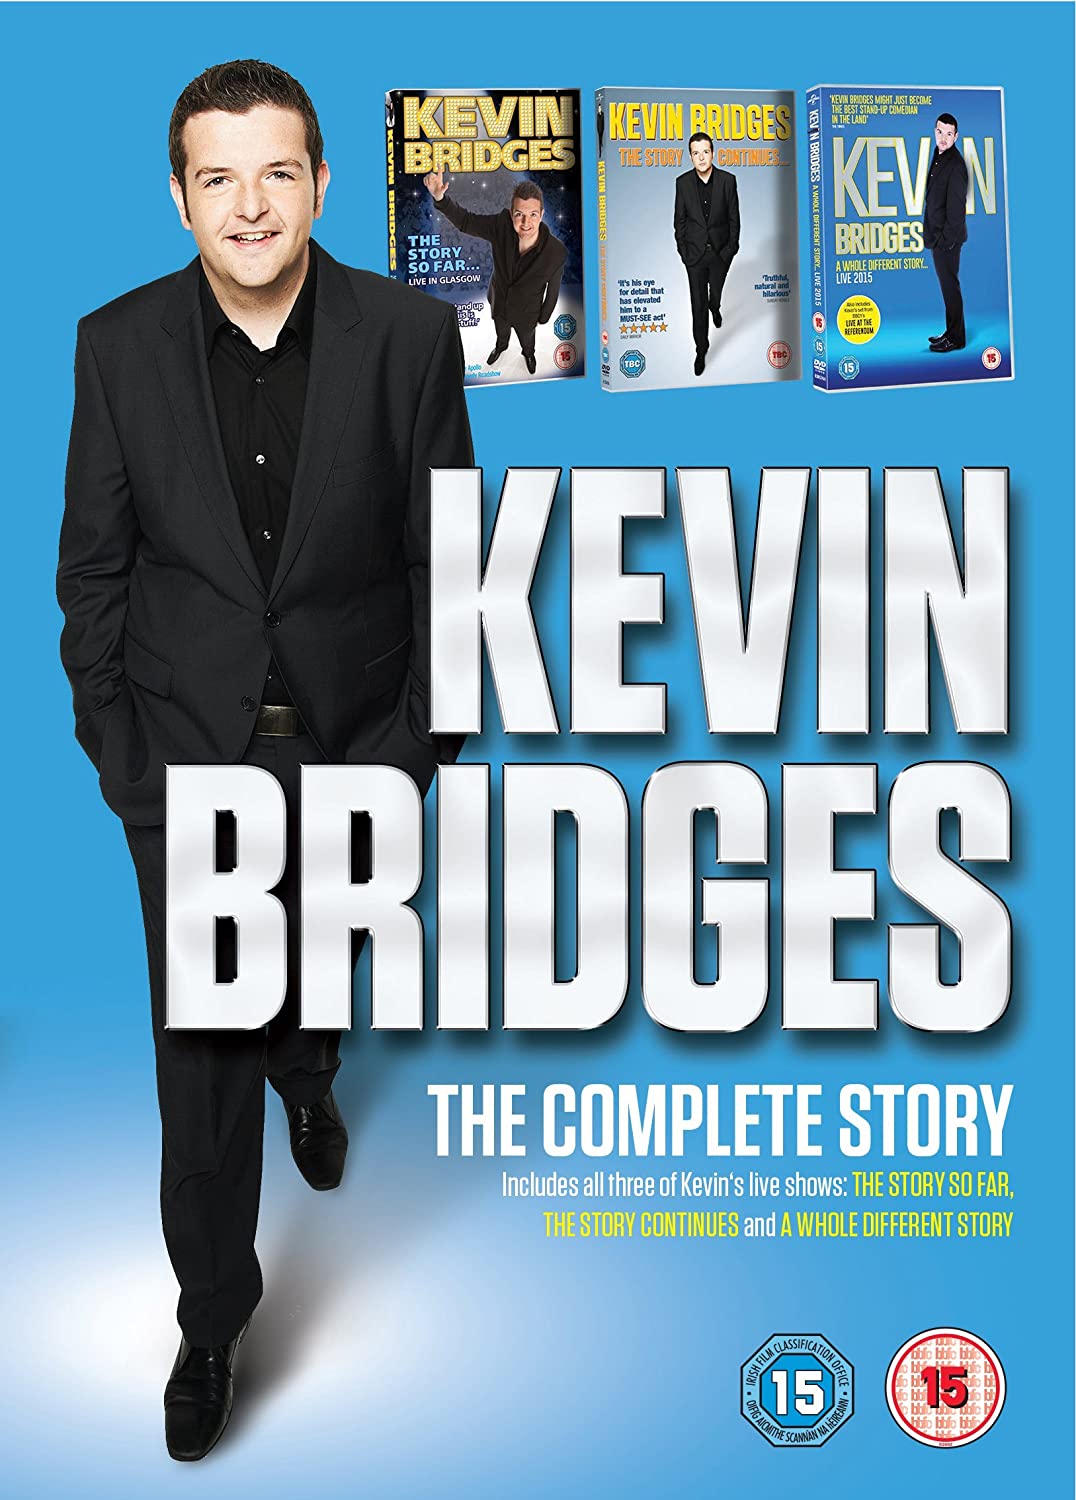 Kevin Bridges: The Complete Story (DVD)